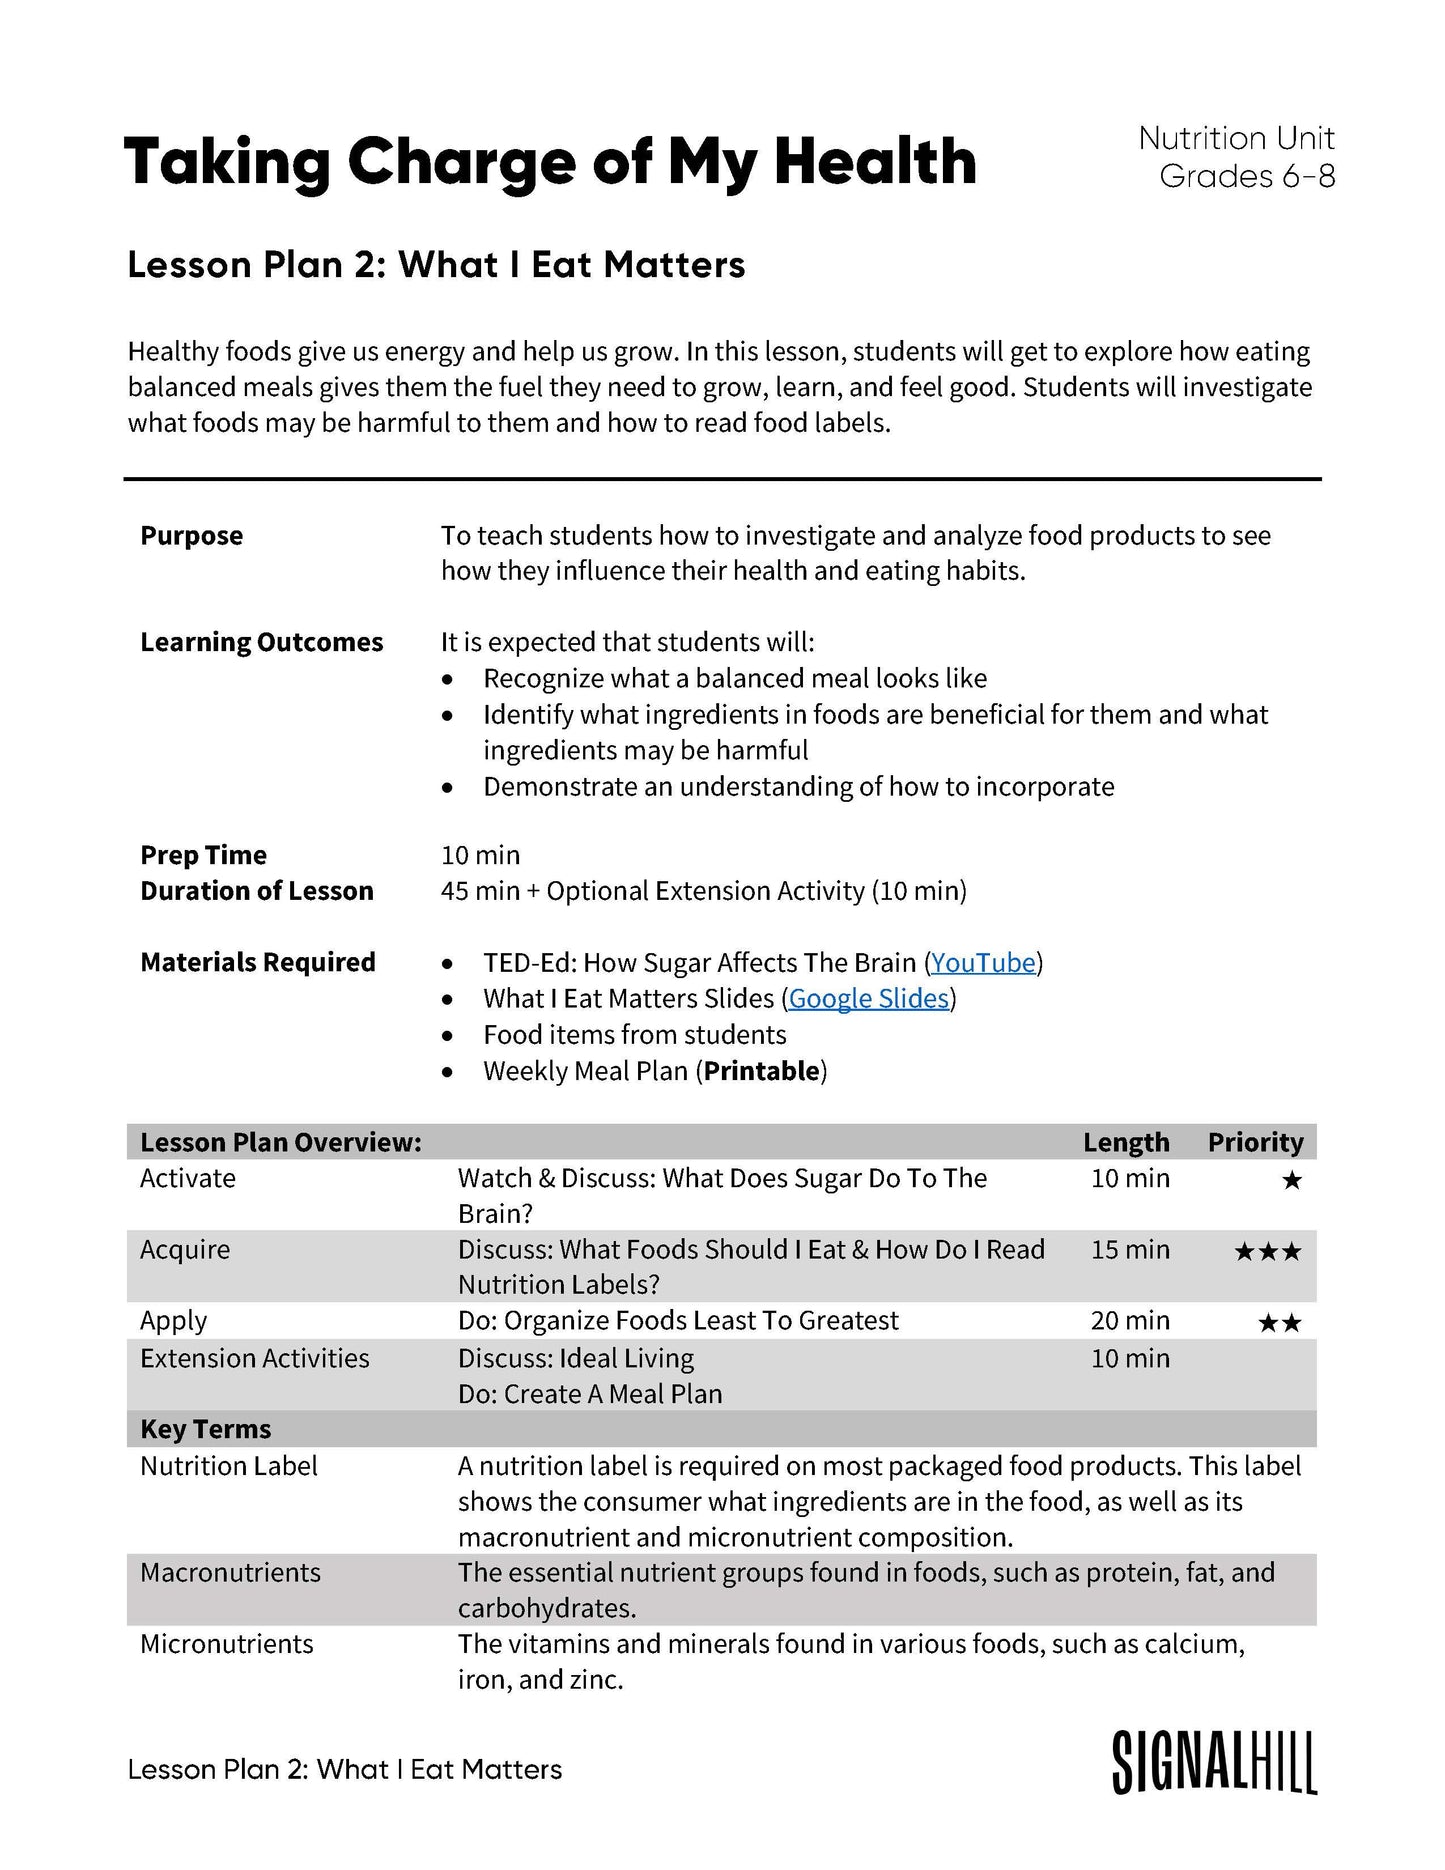 Taking Charge of My Health - Lesson Plan Bundle (4 Lesson Plans)